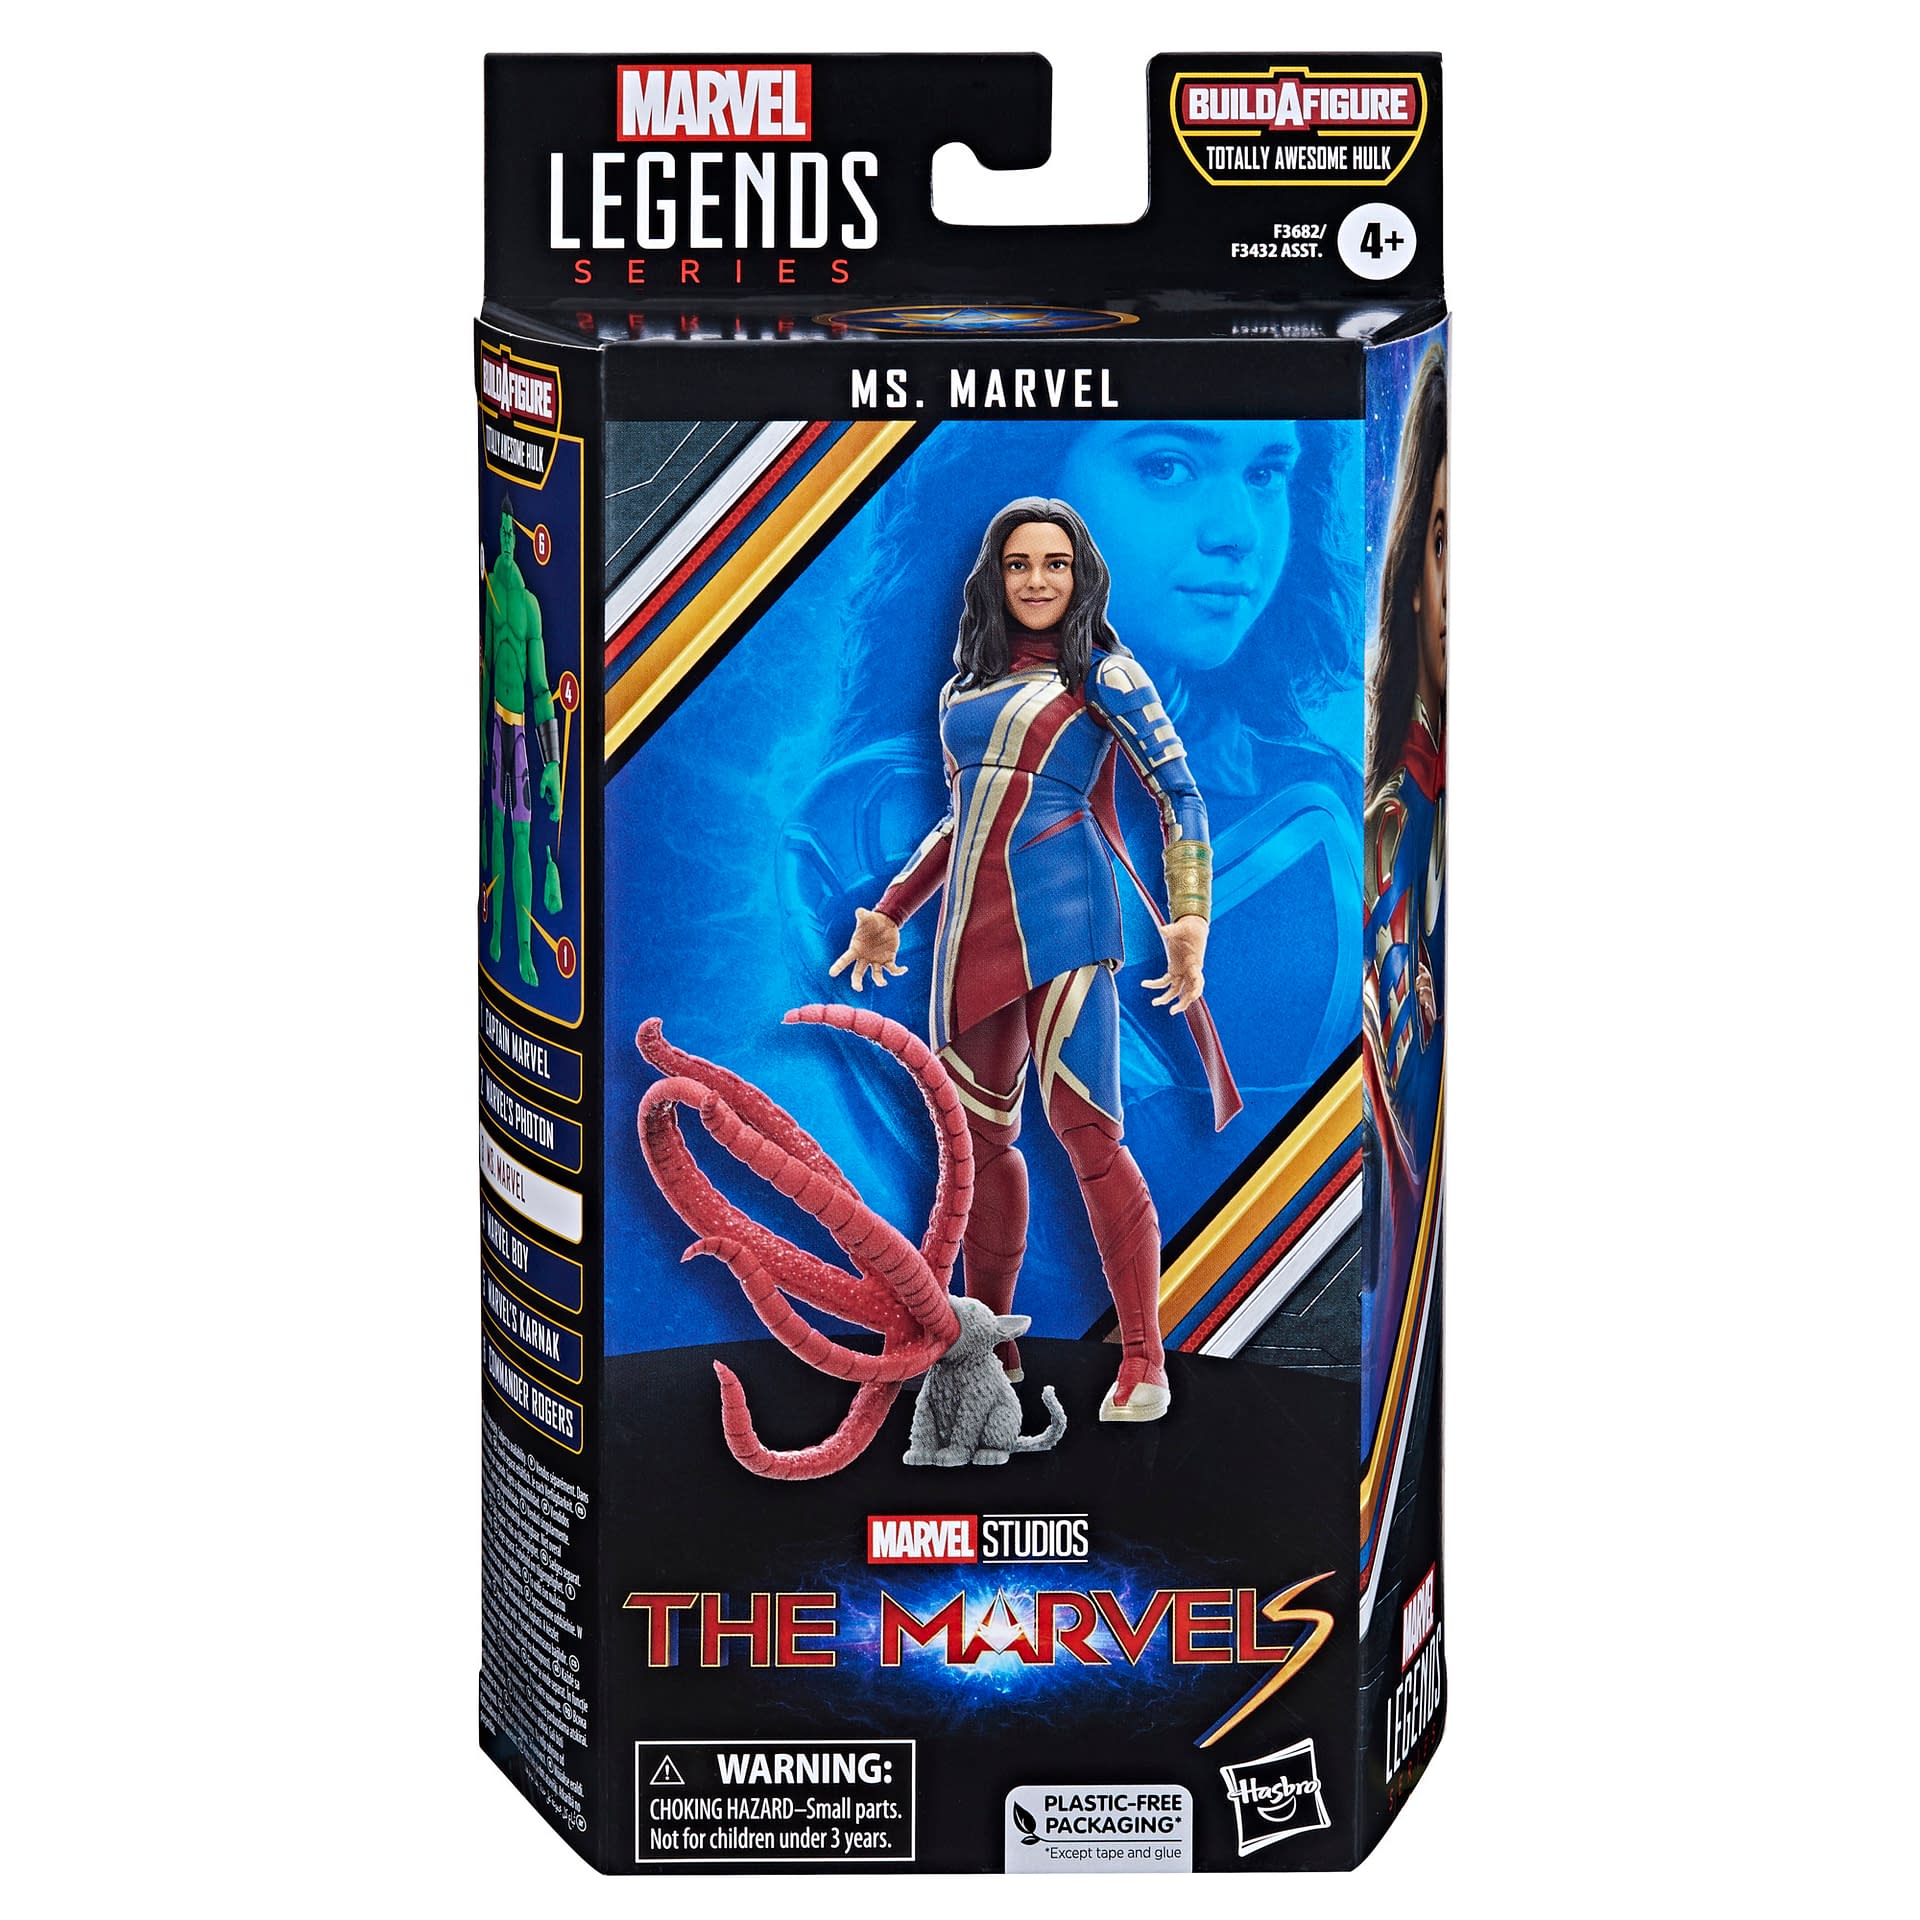 The Marvels Photon Gets Her Own Marvel Legends Figure from Hasbro 